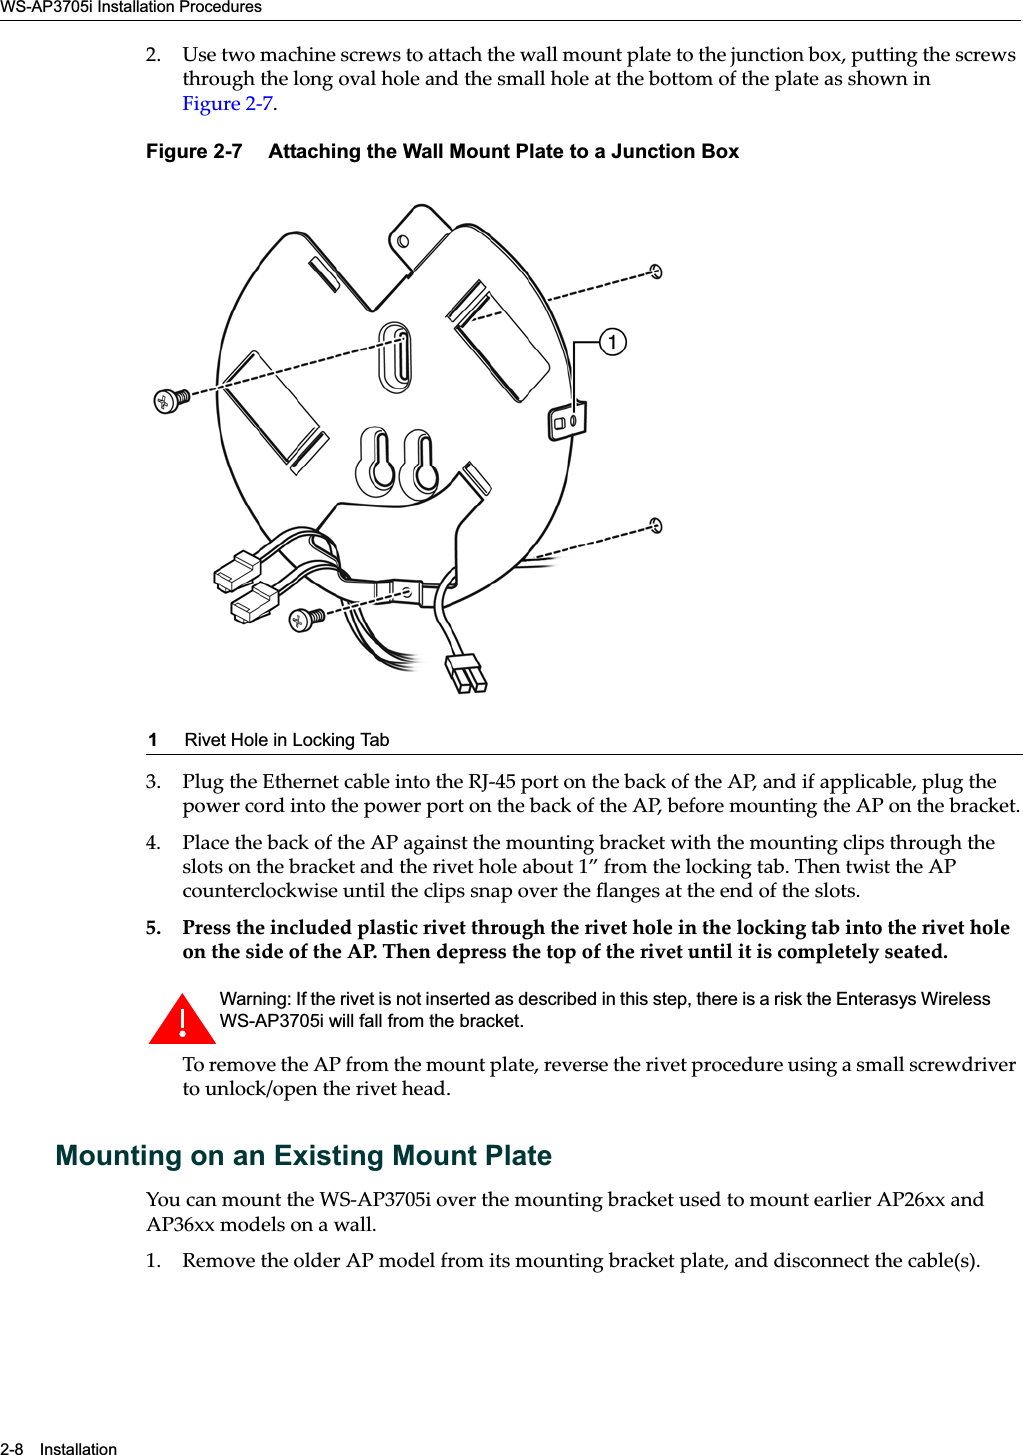 WS-AP3705i Installation Procedures2-8 Installation2. Use two machine screws to attach the wall mount plate to the junction box, putting the screws through the long oval hole and the small hole at the bottom of the plate as shown in Figure 2-7.Figure 2-7  Attaching the Wall Mount Plate to a Junction Box3. Plug the Ethernet cable into the RJ-45 port on the back of the AP, and if applicable, plug the power cord into the power port on the back of the AP, before mounting the AP on the bracket.4. Place the back of the AP against the mounting bracket with the mounting clips through the slots on the bracket and the rivet hole about 1” from the locking tab. Then twist the AP counterclockwise until the clips snap over the flanges at the end of the slots.5. Press the included plastic rivet through the rivet hole in the locking tab into the rivet hole on the side of the AP. Then depress the top of the rivet until it is completely seated.To remove the AP from the mount plate, reverse the rivet procedure using a small screwdriver to unlock/open the rivet head.Mounting on an Existing Mount PlateYou can mount the WS-AP3705i over the mounting bracket used to mount earlier AP26xx and AP36xx models on a wall. 1. Remove the older AP model from its mounting bracket plate, and disconnect the cable(s).1Rivet Hole in Locking TabWarning: If the rivet is not inserted as described in this step, there is a risk the Enterasys Wireless WS-AP3705i will fall from the bracket.Draft